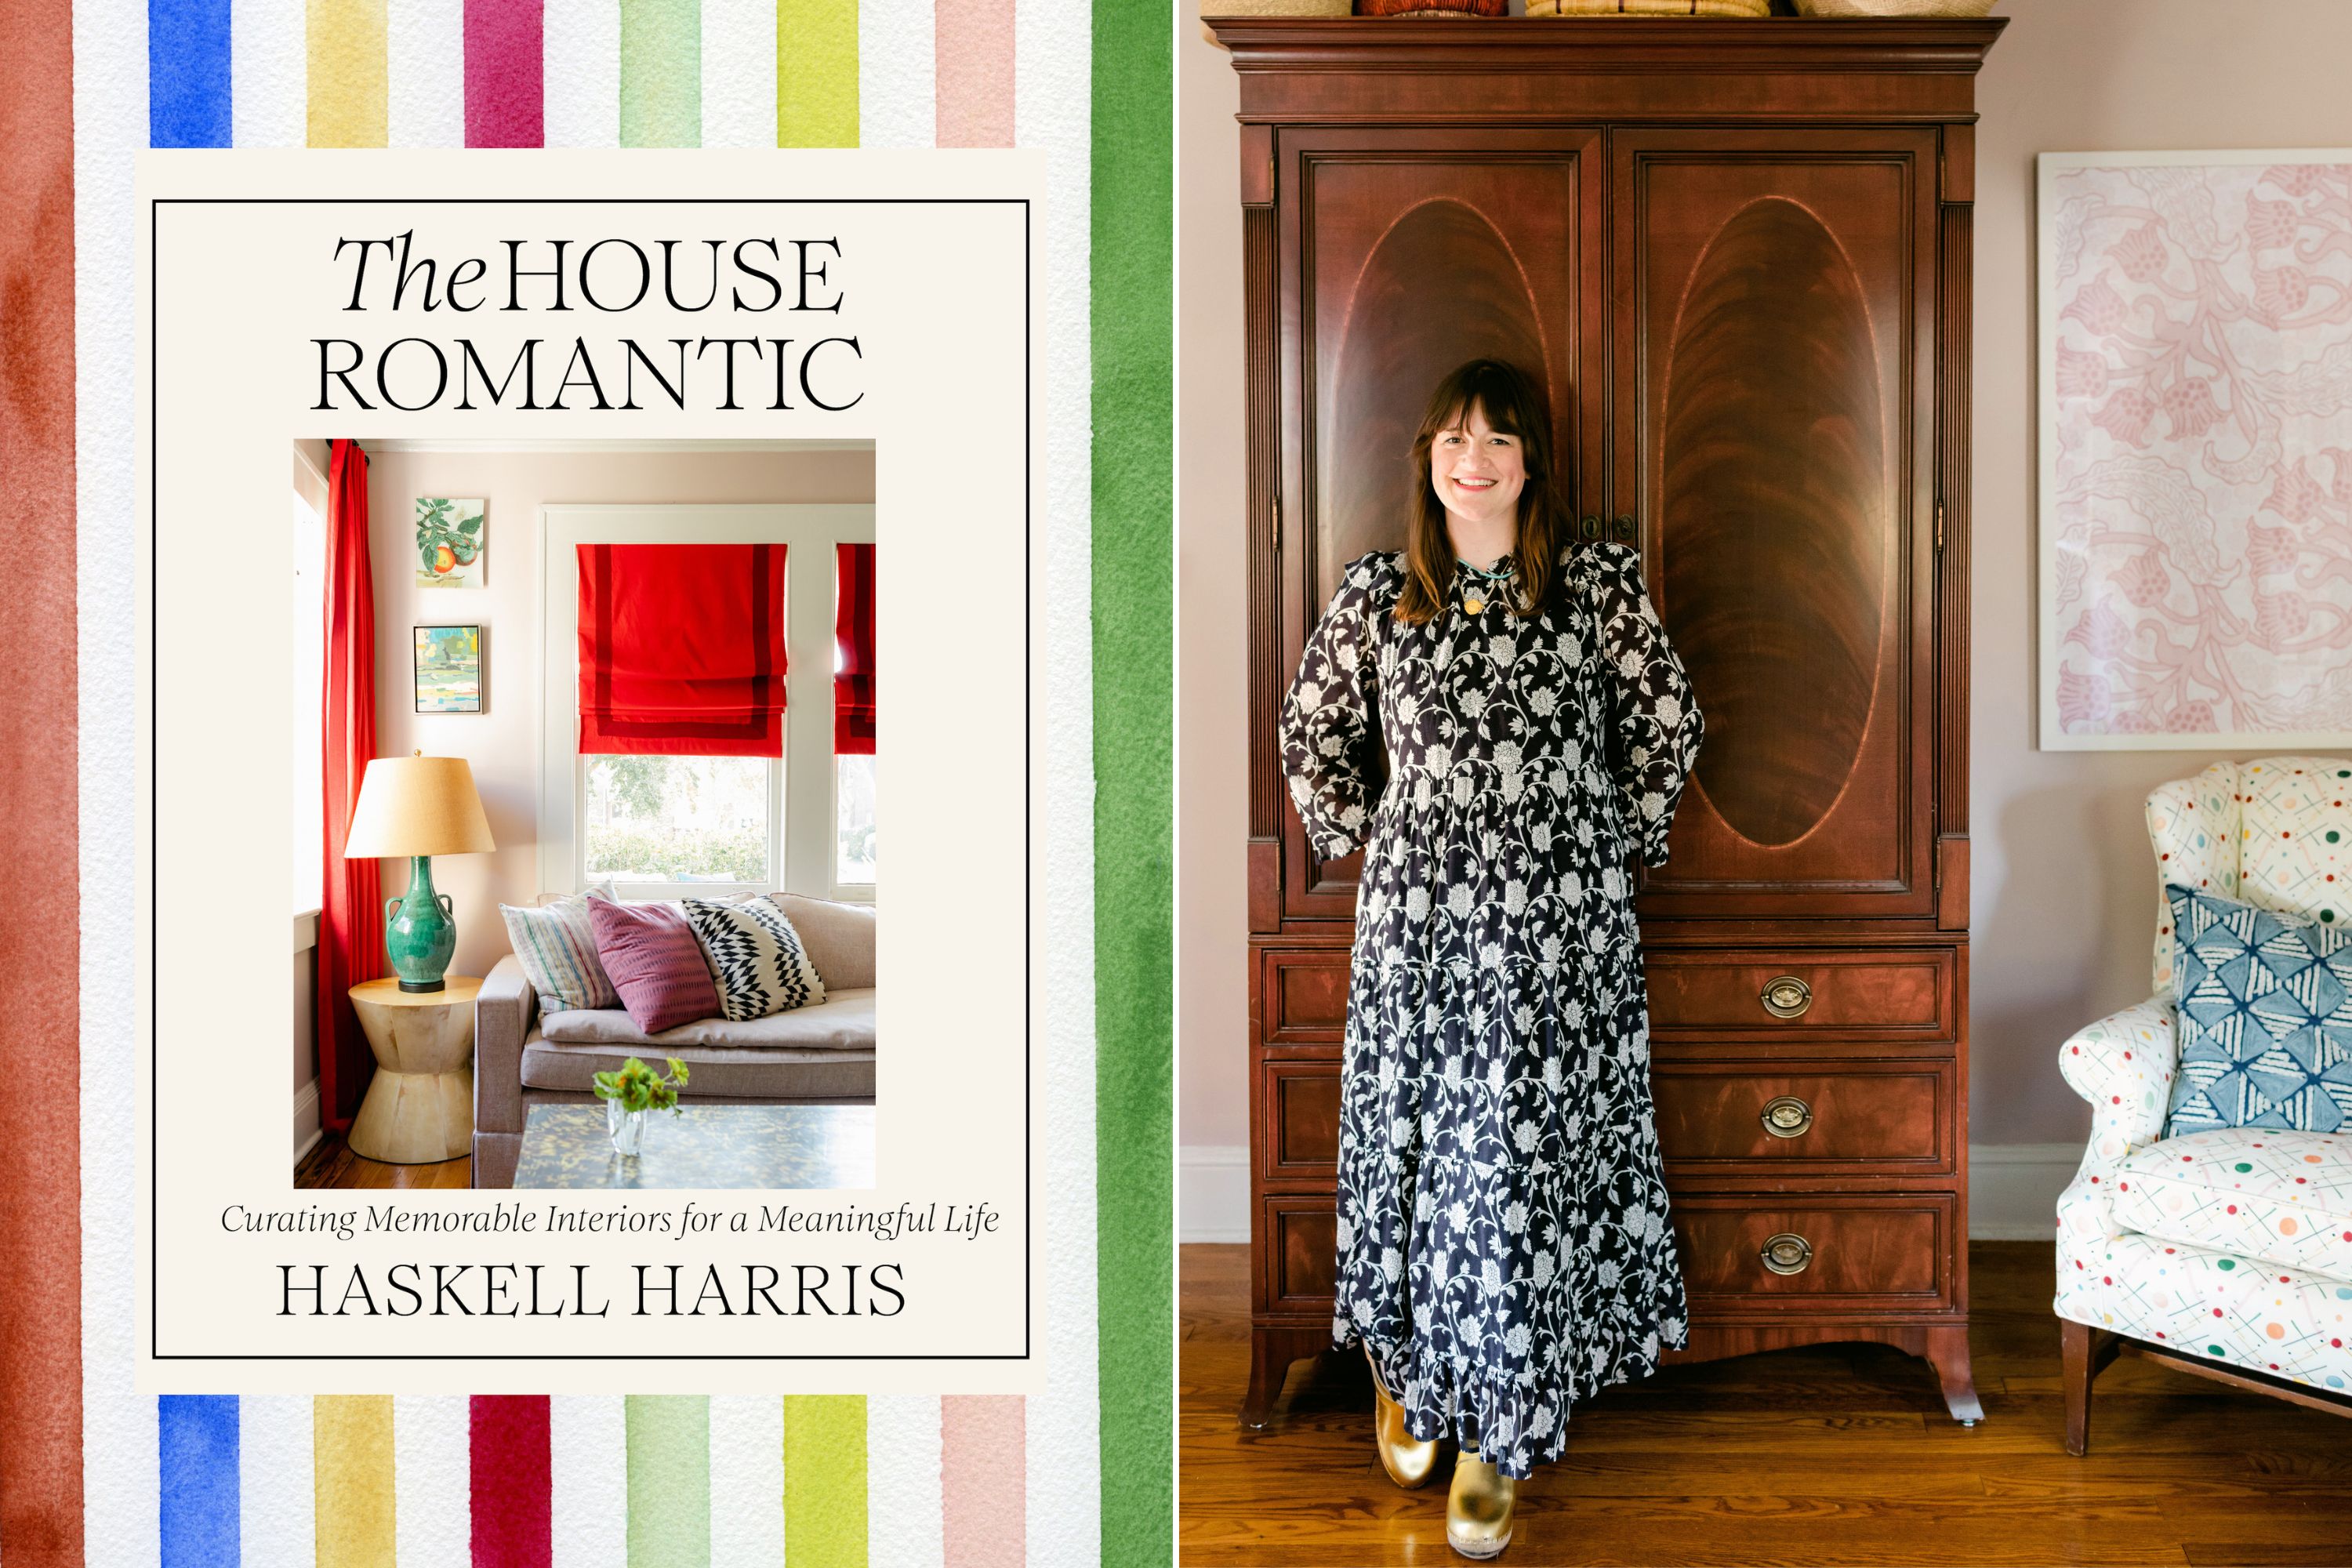 A collage of two images: A colorful striped book cover with a photo of a pink and red living room; a woman standing in a living room.